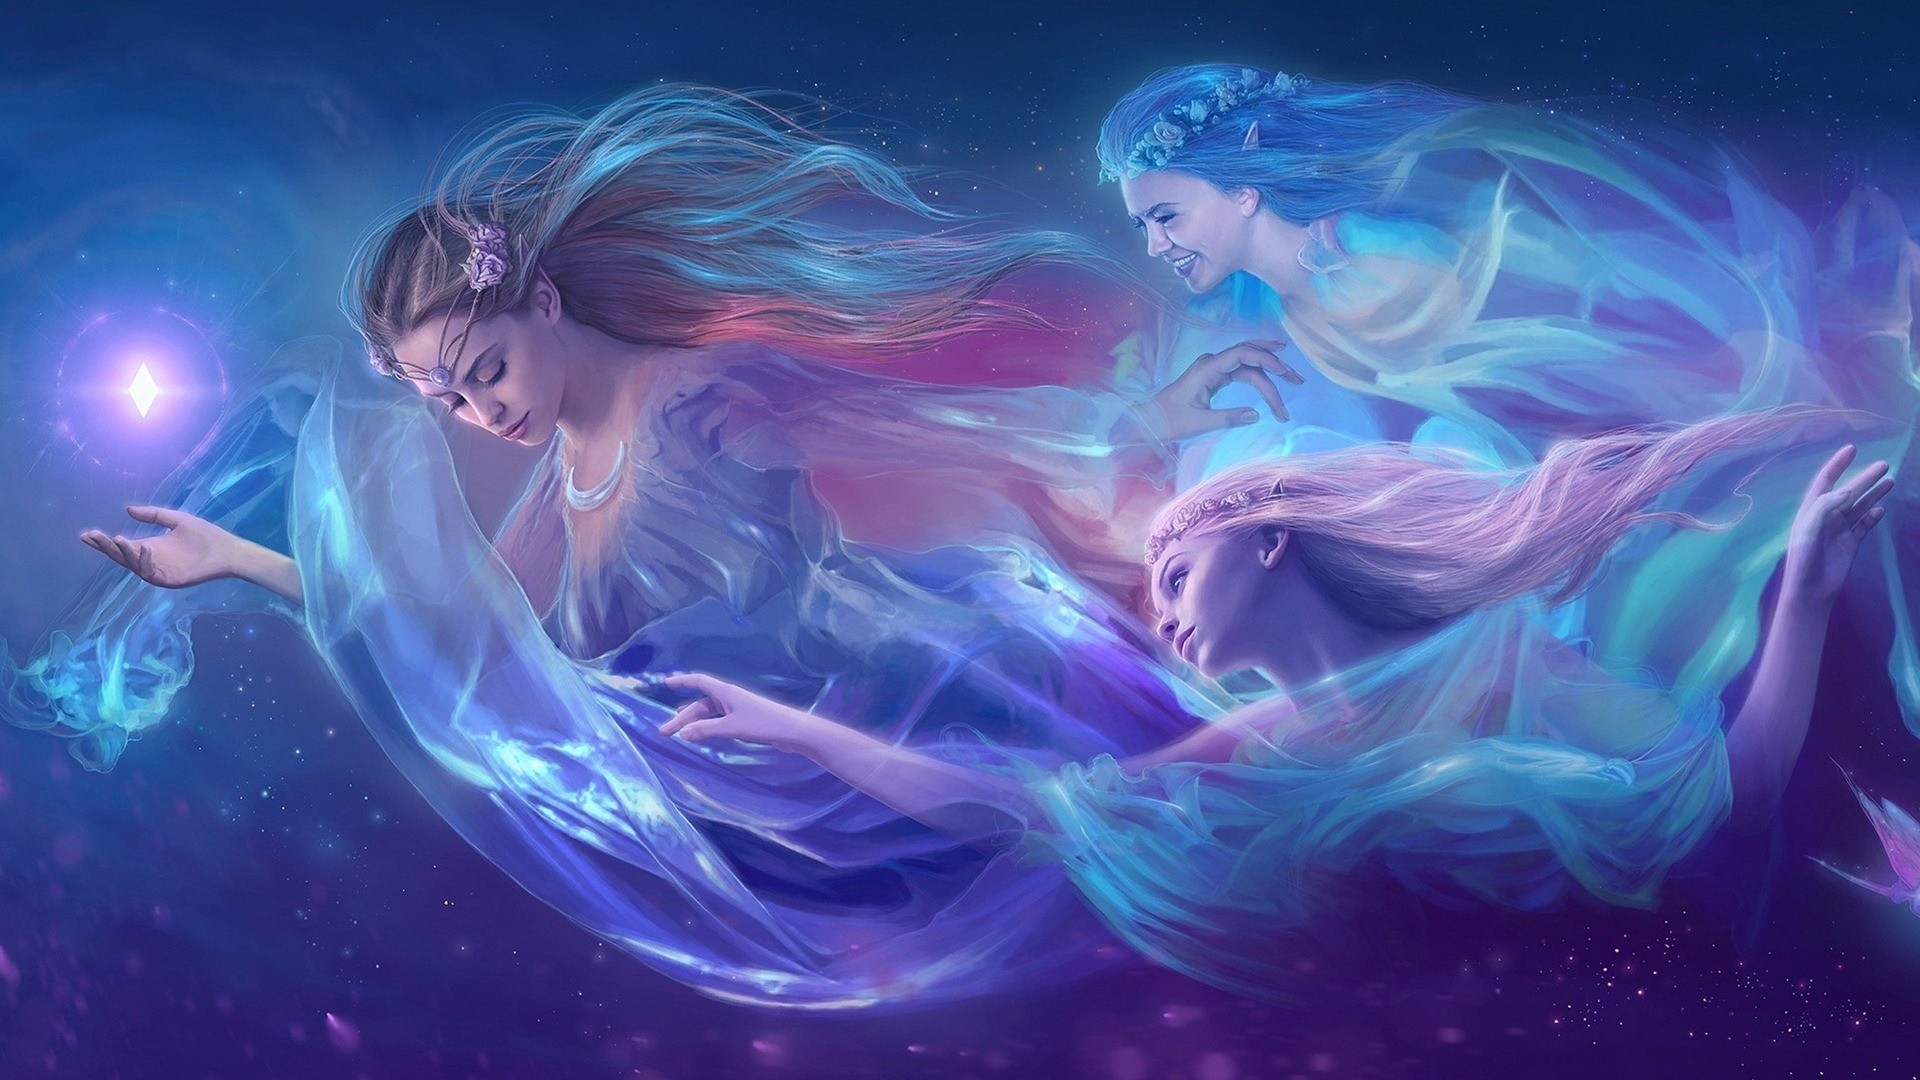 Fairy Wallpaper and HD Background free download on PicGaGa